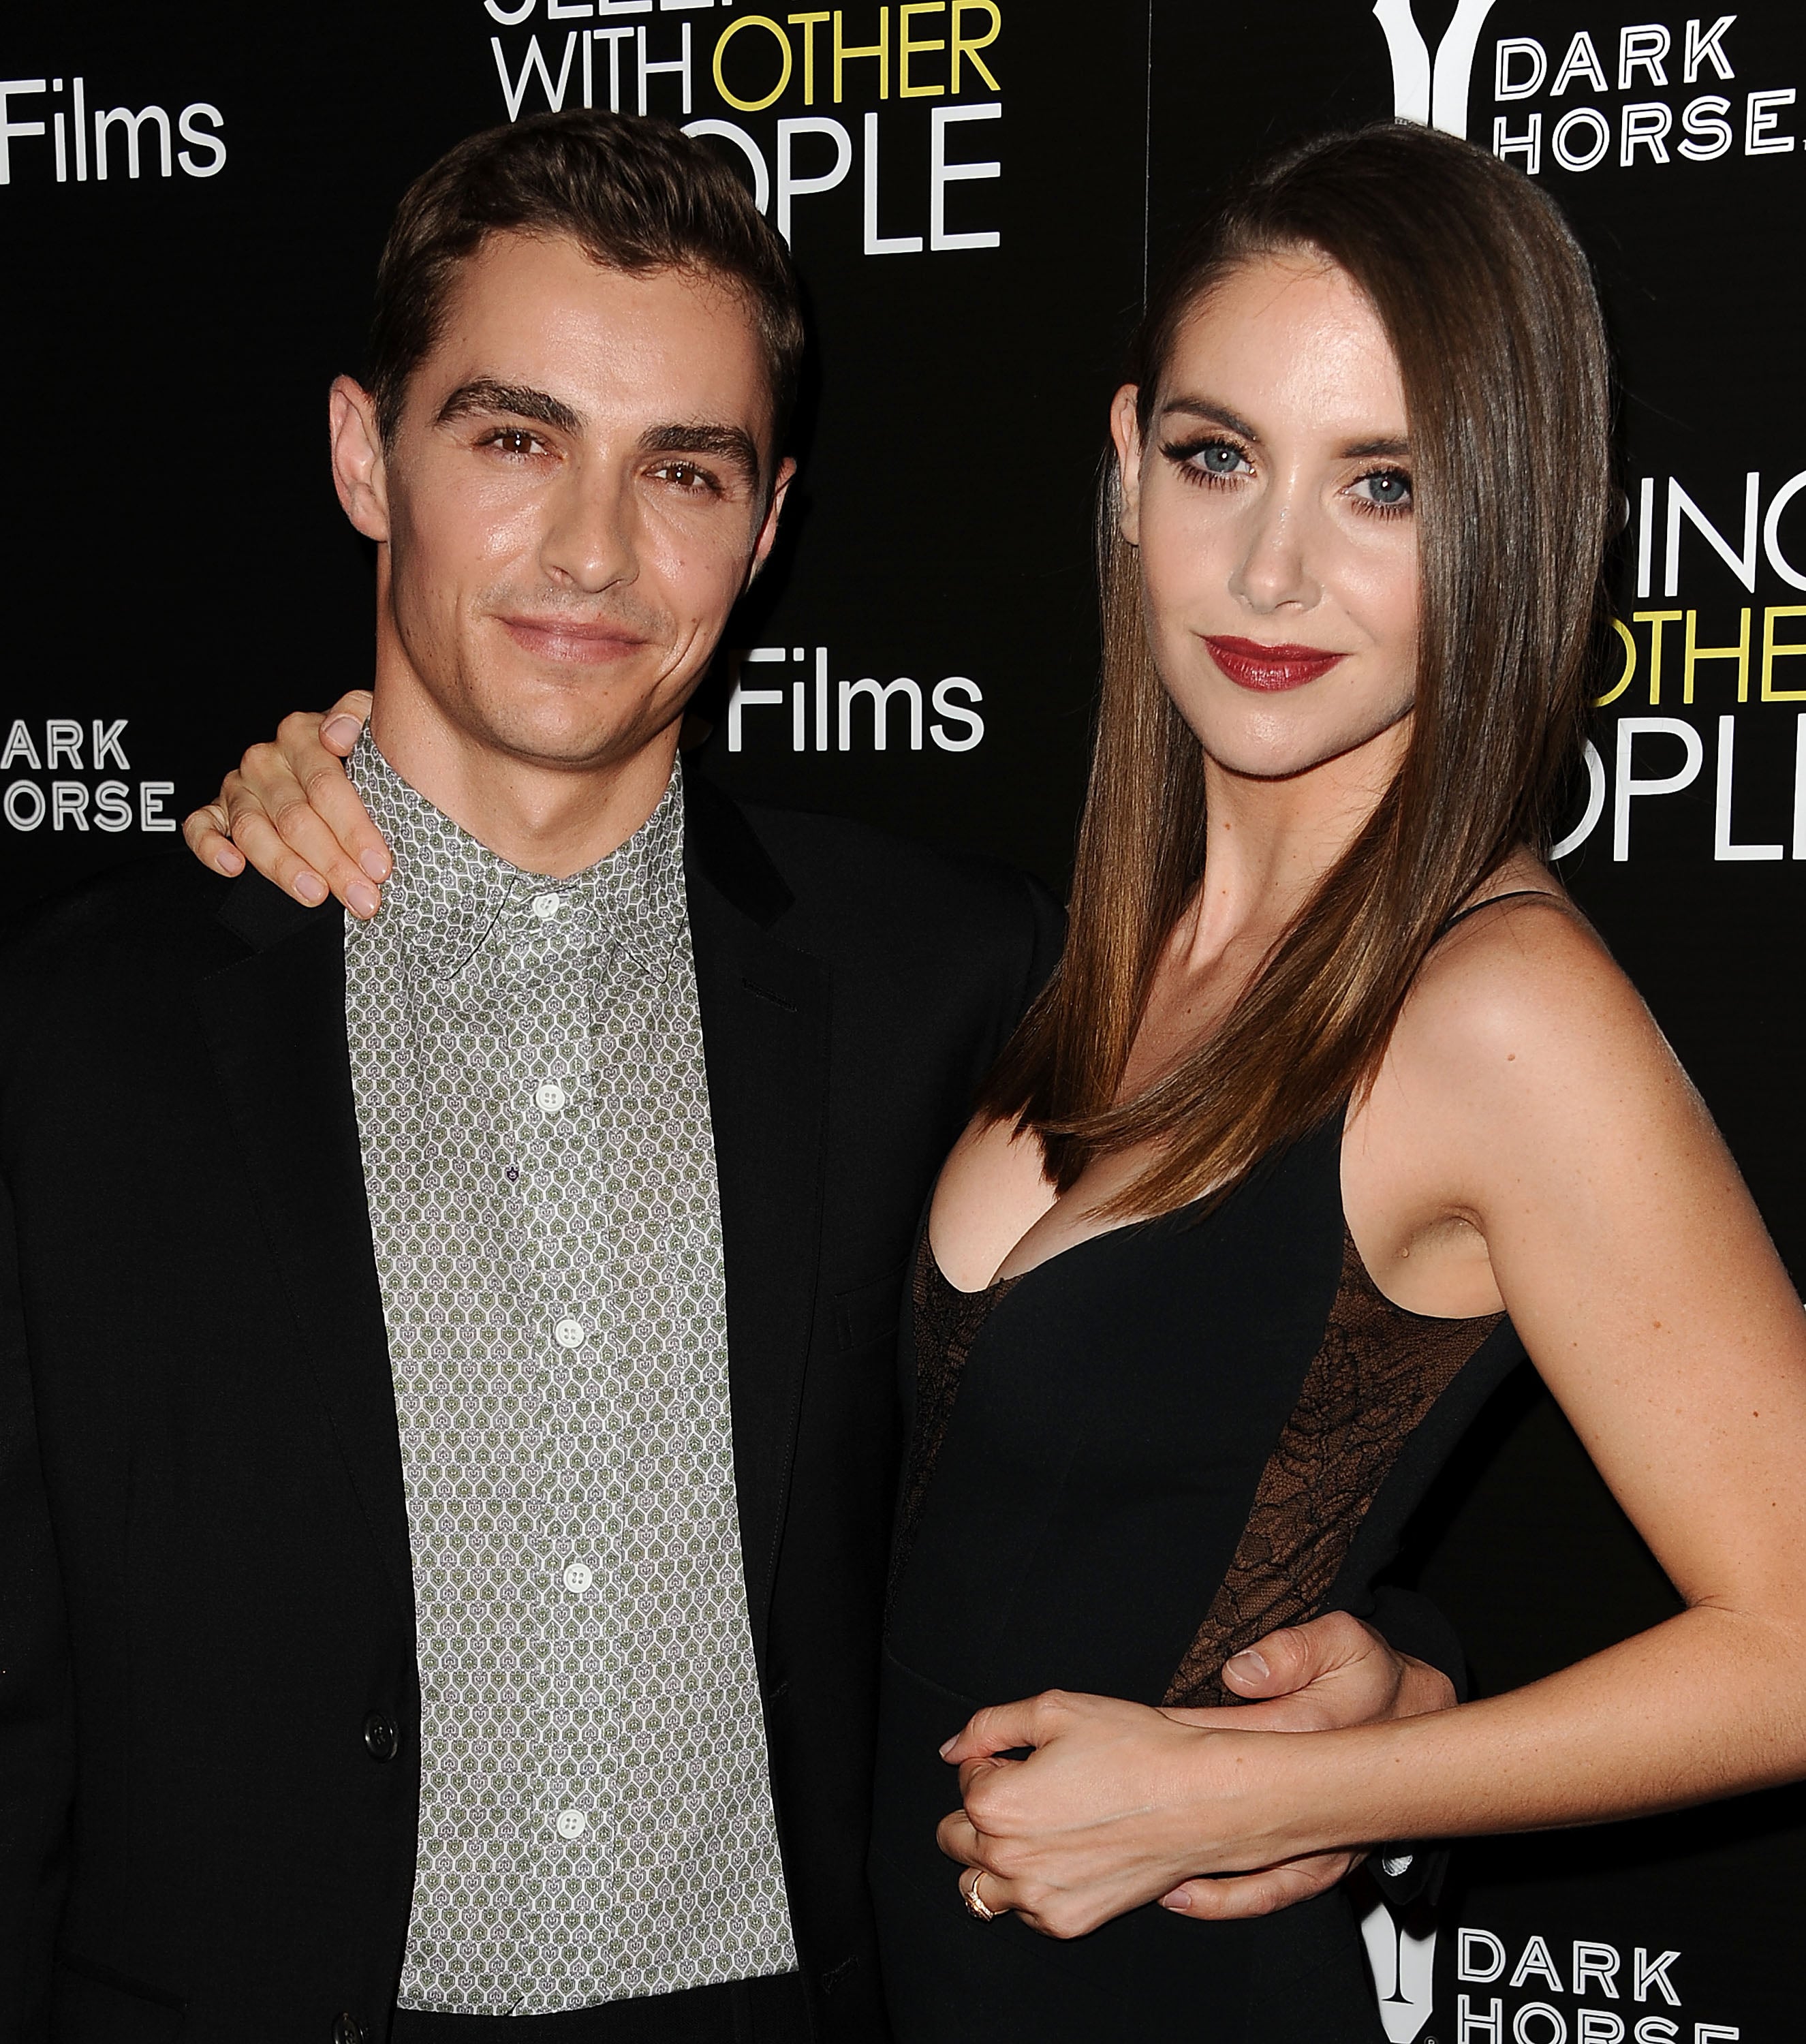 Alison Brie and Dave Franco's Relationship Timeline